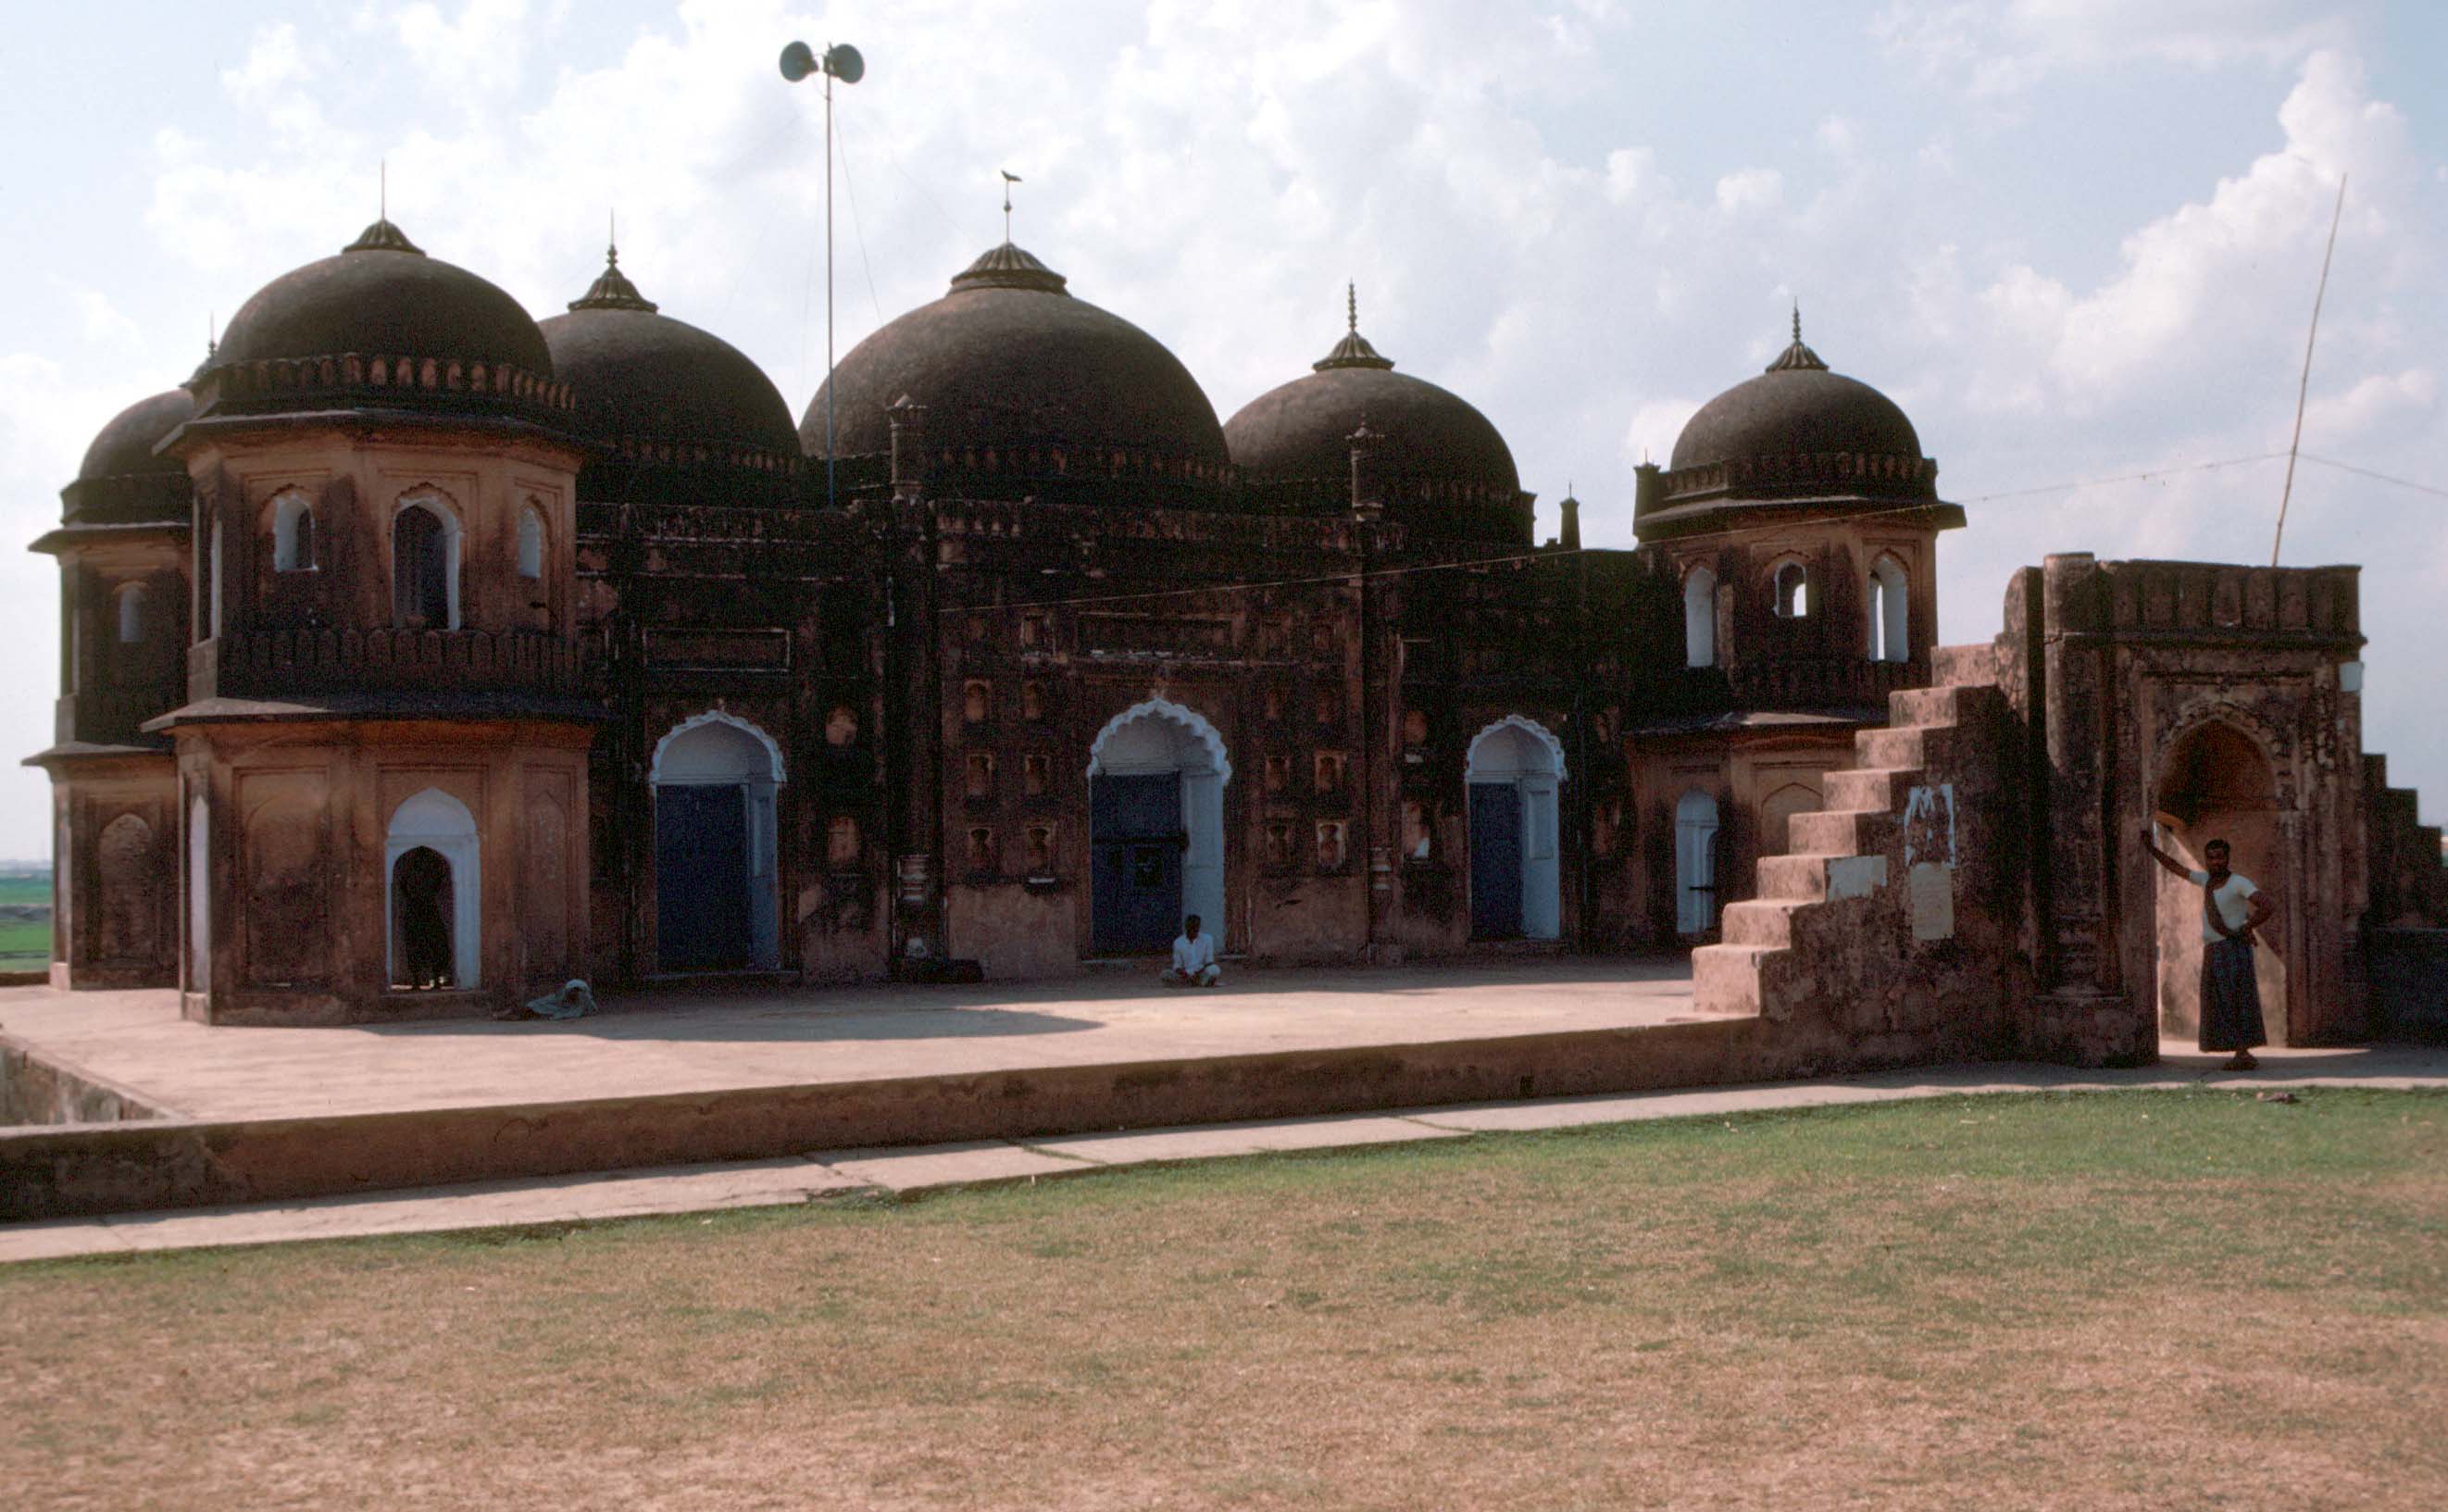 Entrance gateway and mosque viewed from southeast